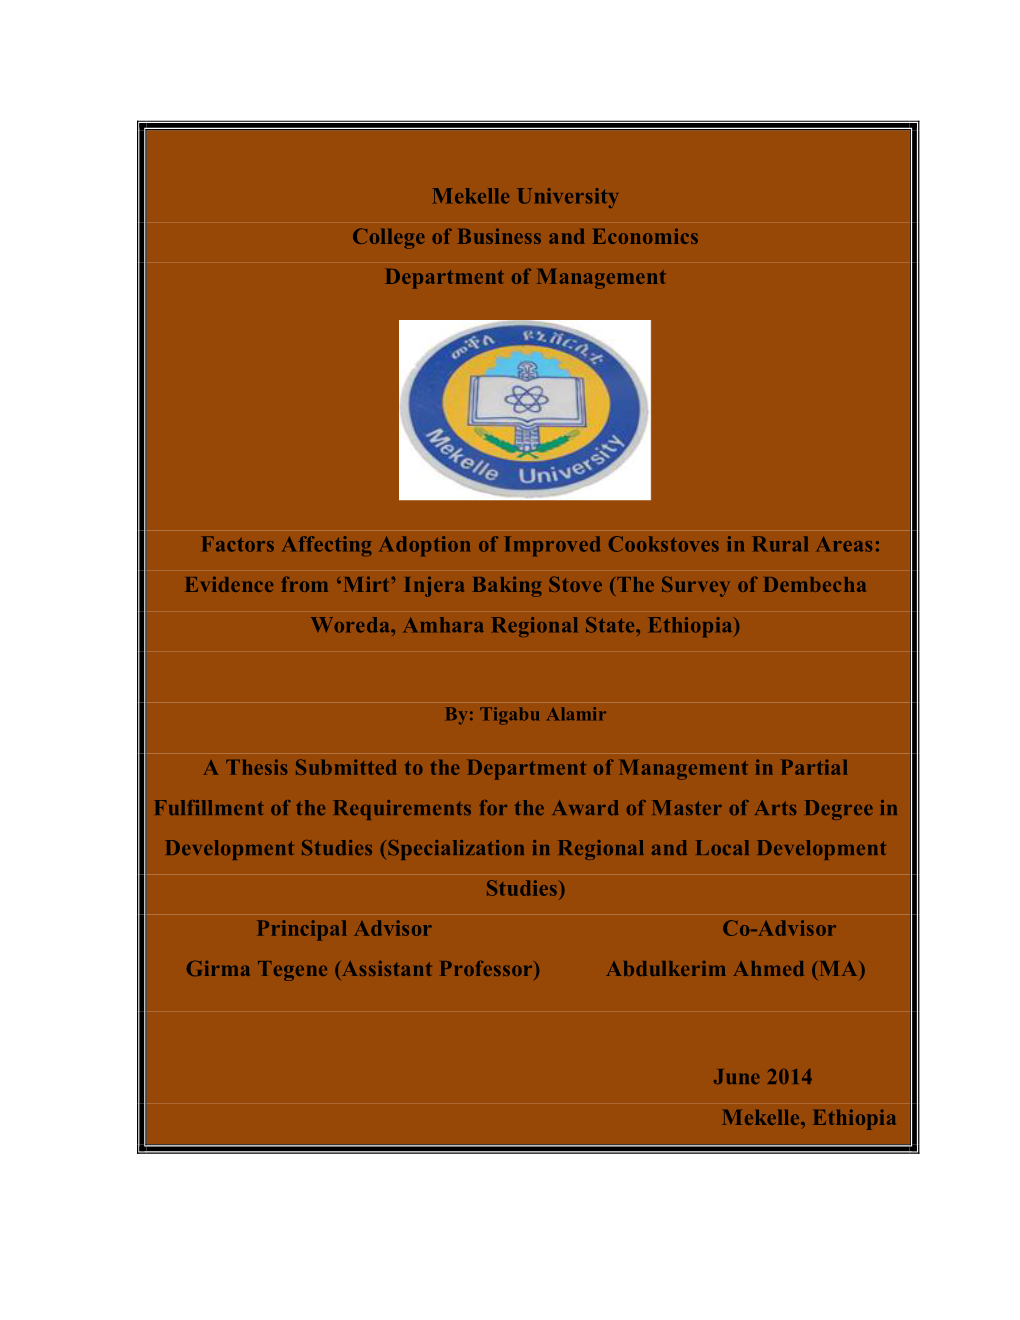 Mekelle University College of Business and Economics Department of Management Factors Affecting Adoption of Improved Cookstoves